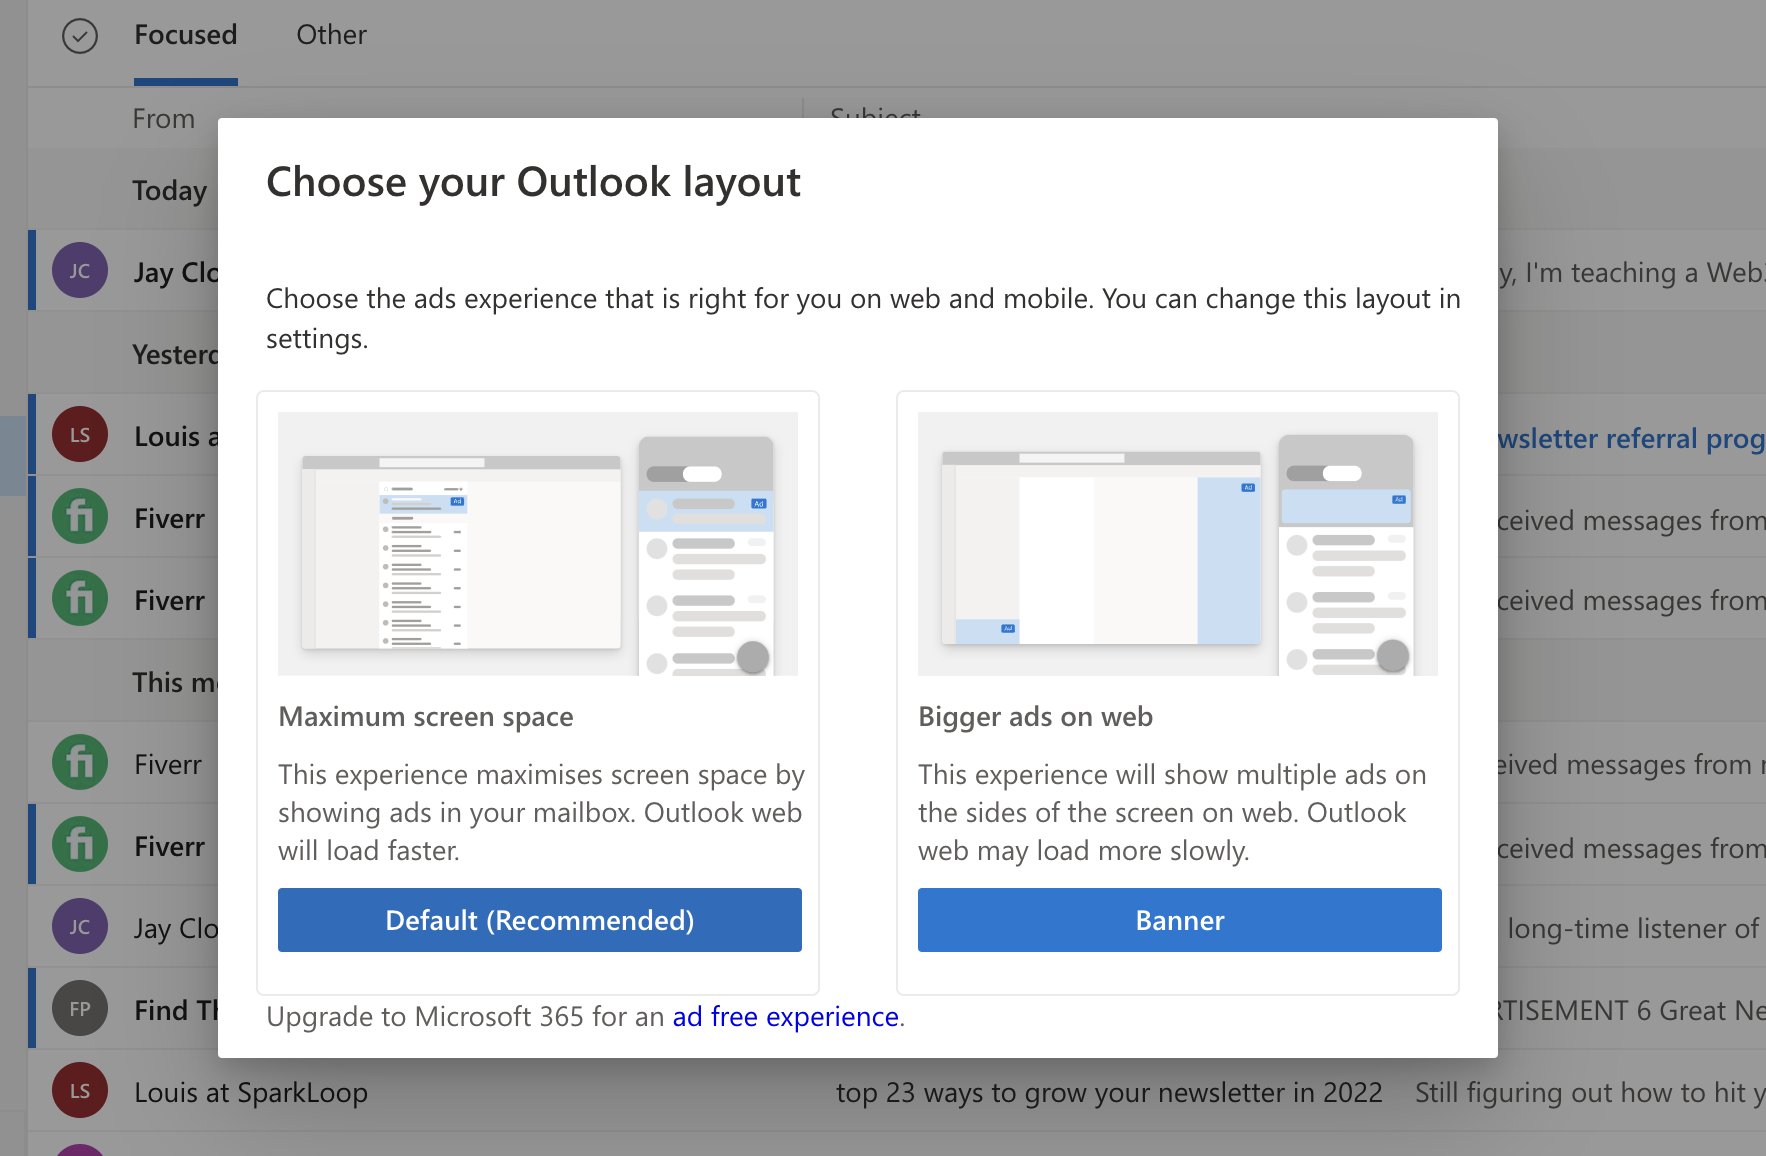 A screenshot of Microsoft Outlook. A dialog presents the user with a choice. "Choose the ads experience that is right for you on web and mobile." The option called "Maximum screen space" reads "This experience maximises screen space by showing ads in your mailbox. Outlook web will load faster". The option called "Bigger ads on web" reads "This experience will show multiple ads on the sides of the screen on web. Outlook web may load more slowly".